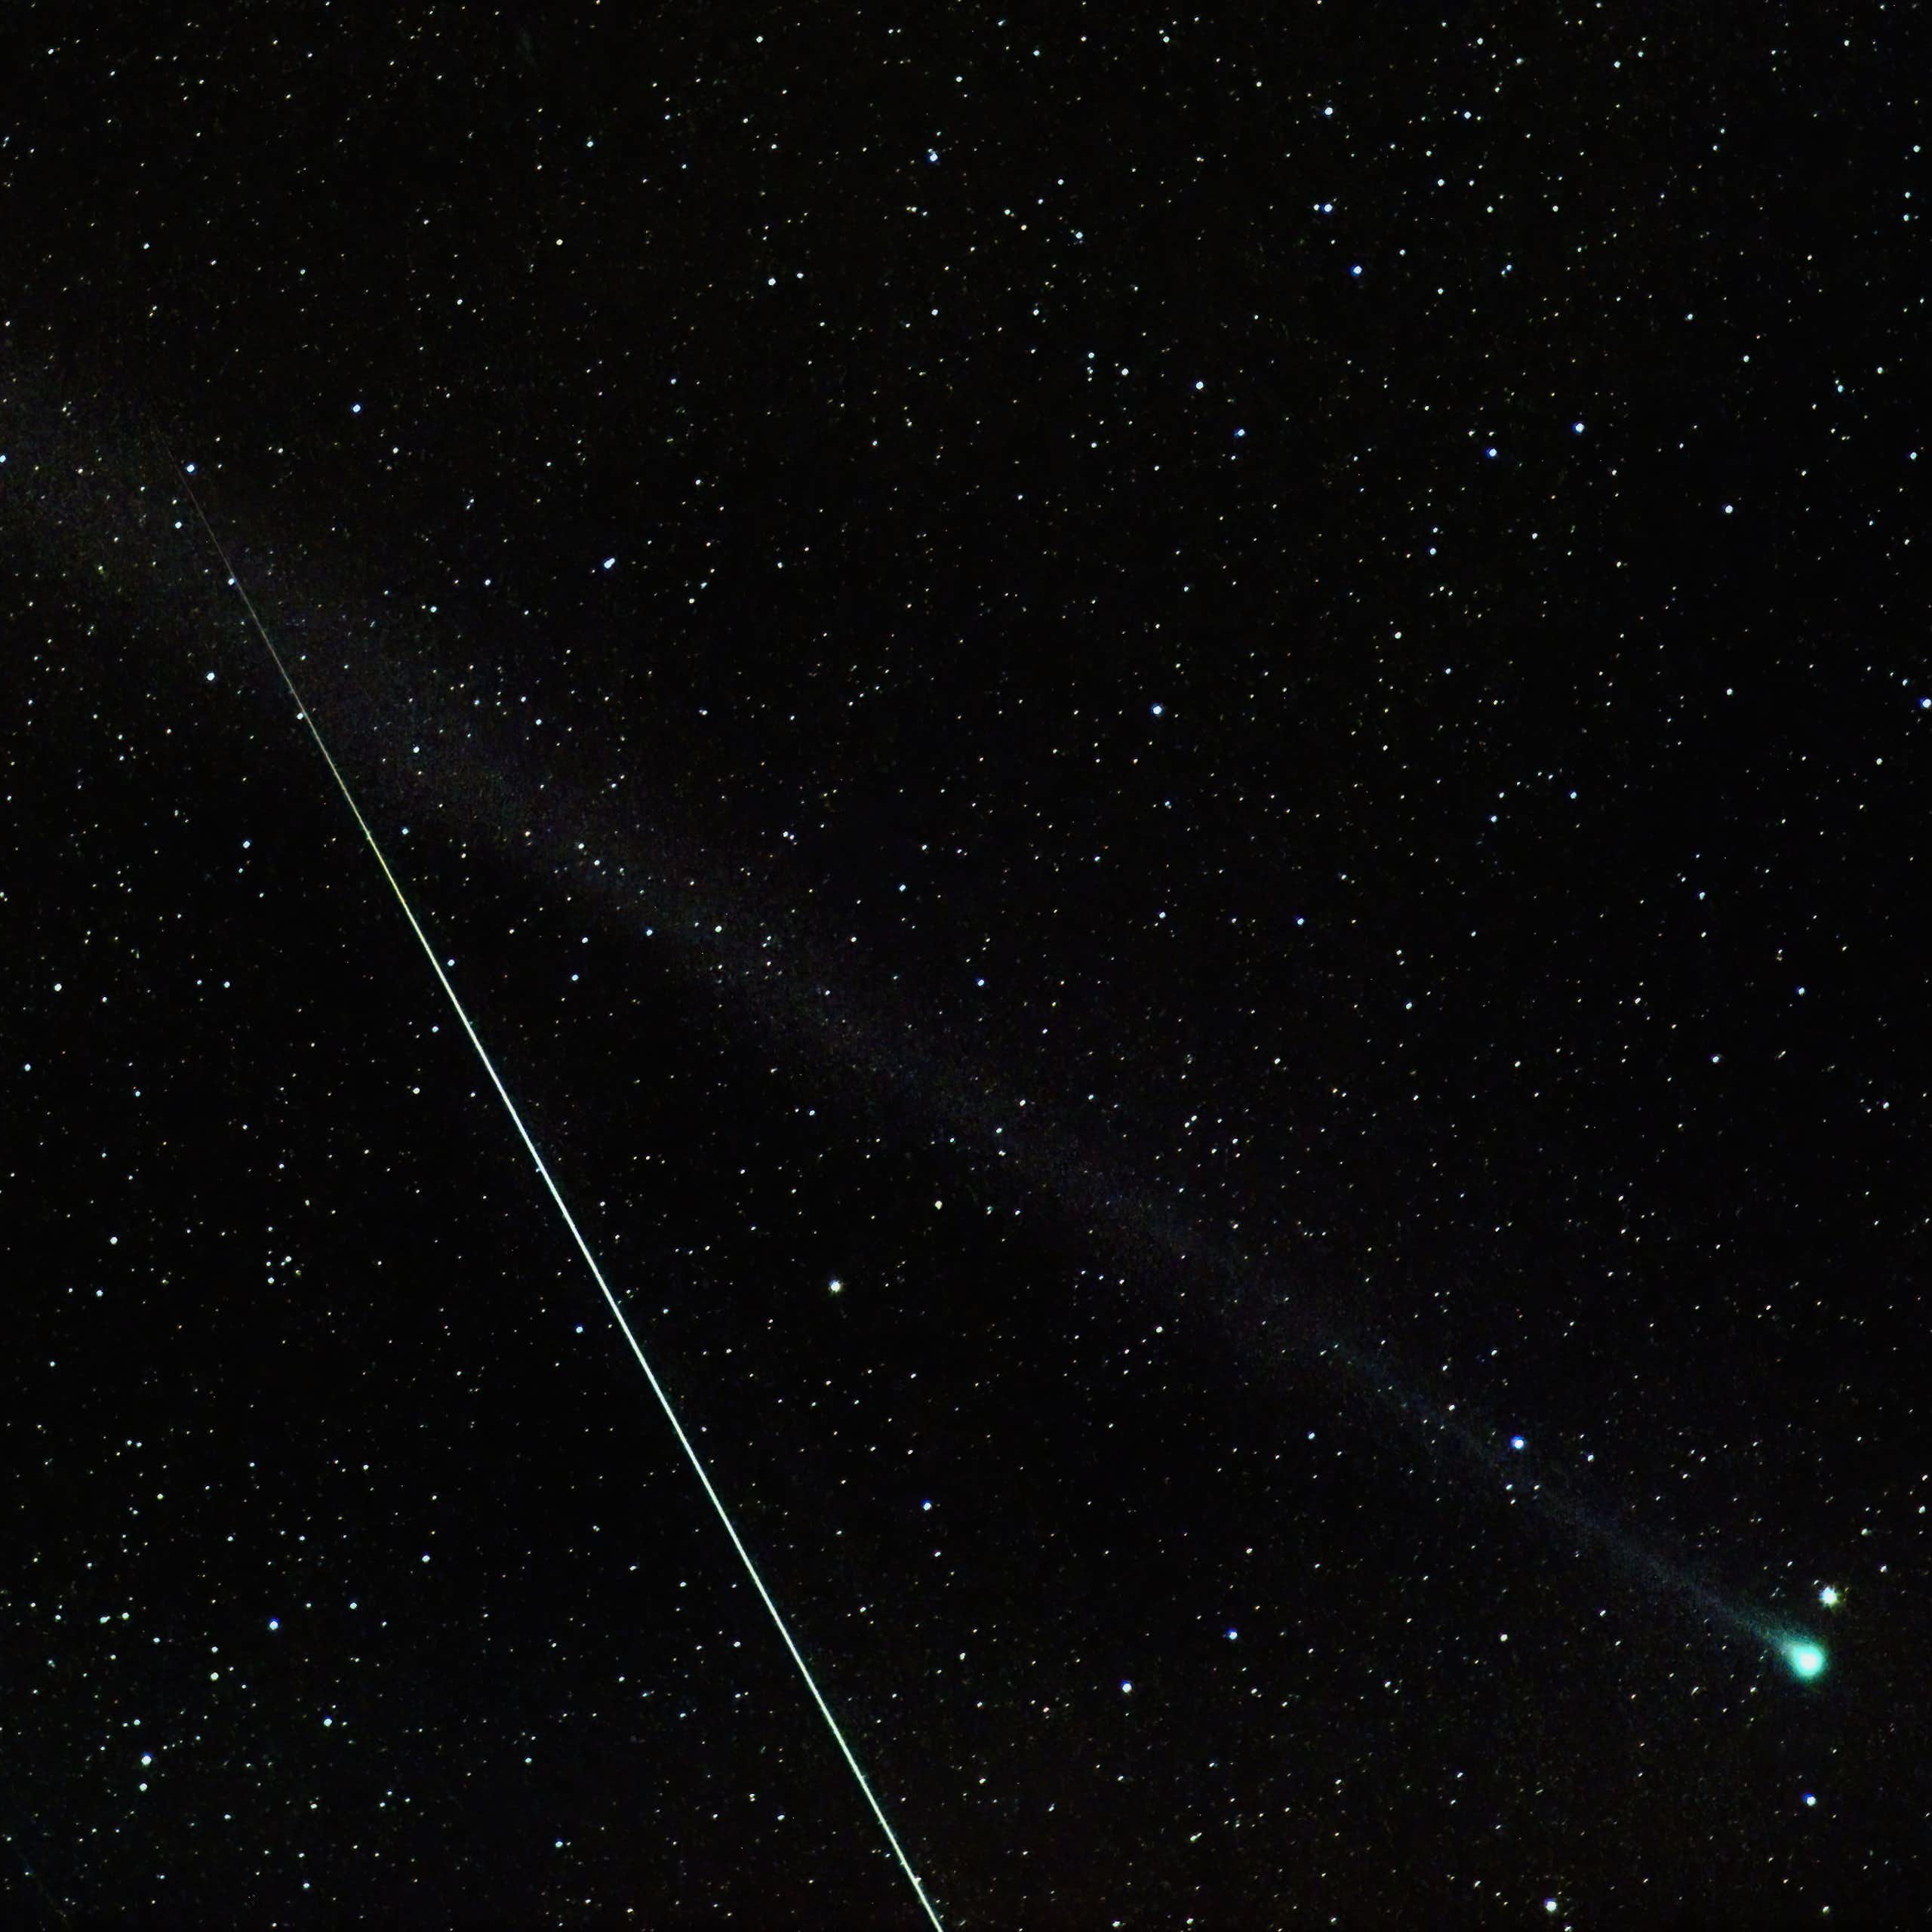 A meteor streaks through a photograph of a green comet.